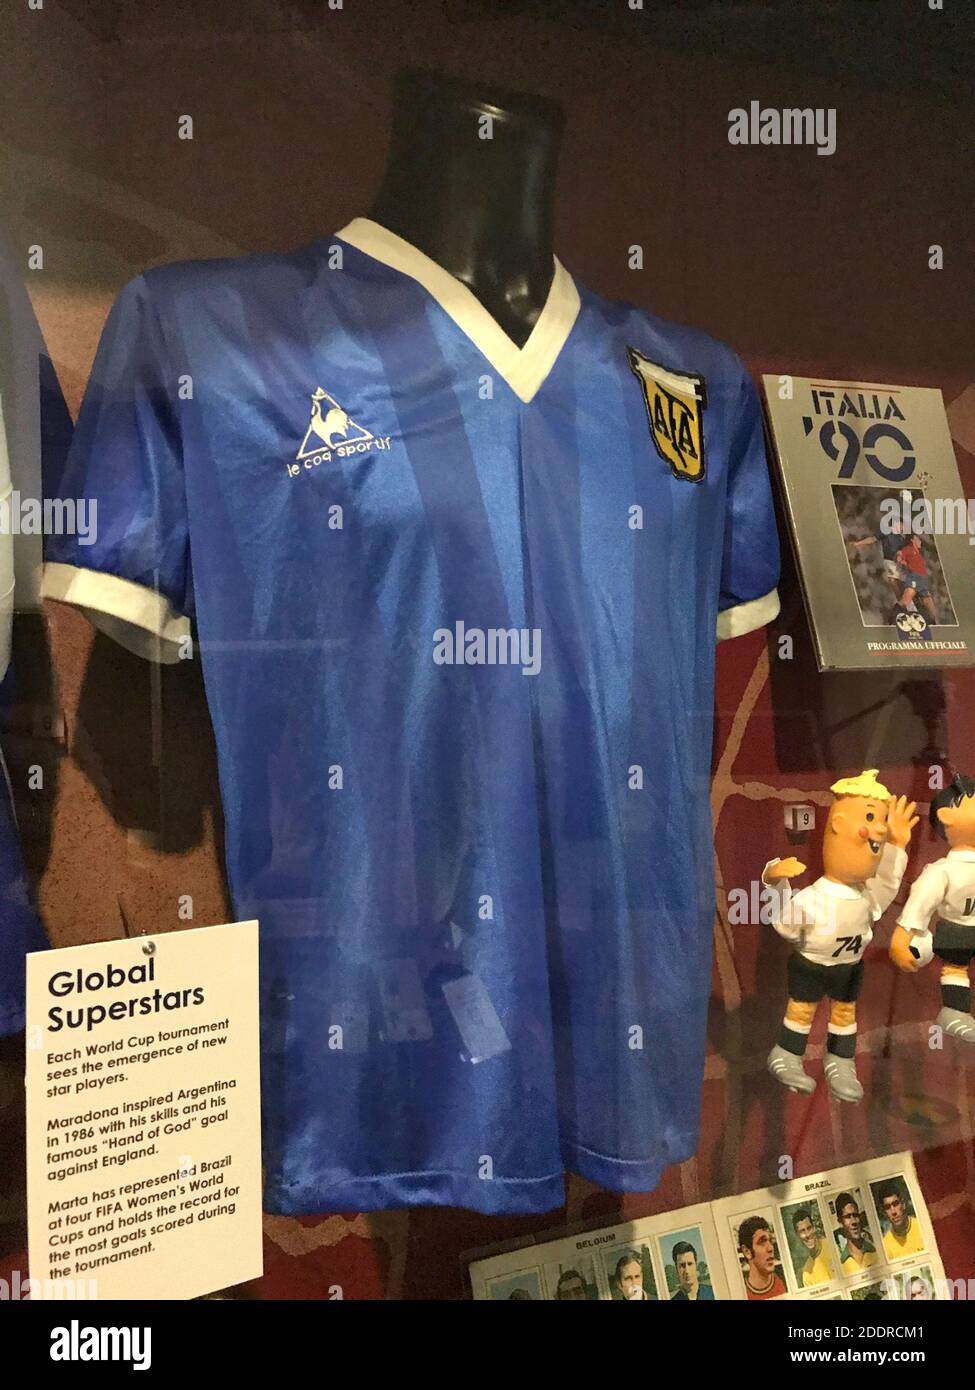 The shirt Diego Maradona wore when he played England in 1986 on display at the National Football Museum in Manchester, It was loaned to them for exhibitions in 2003 by former England midfielder Hodge, who swapped shirts with Maradona after the ÔHand of GodÕ World Cup quarter-final in Mexico City 34 years ago. Stock Photo